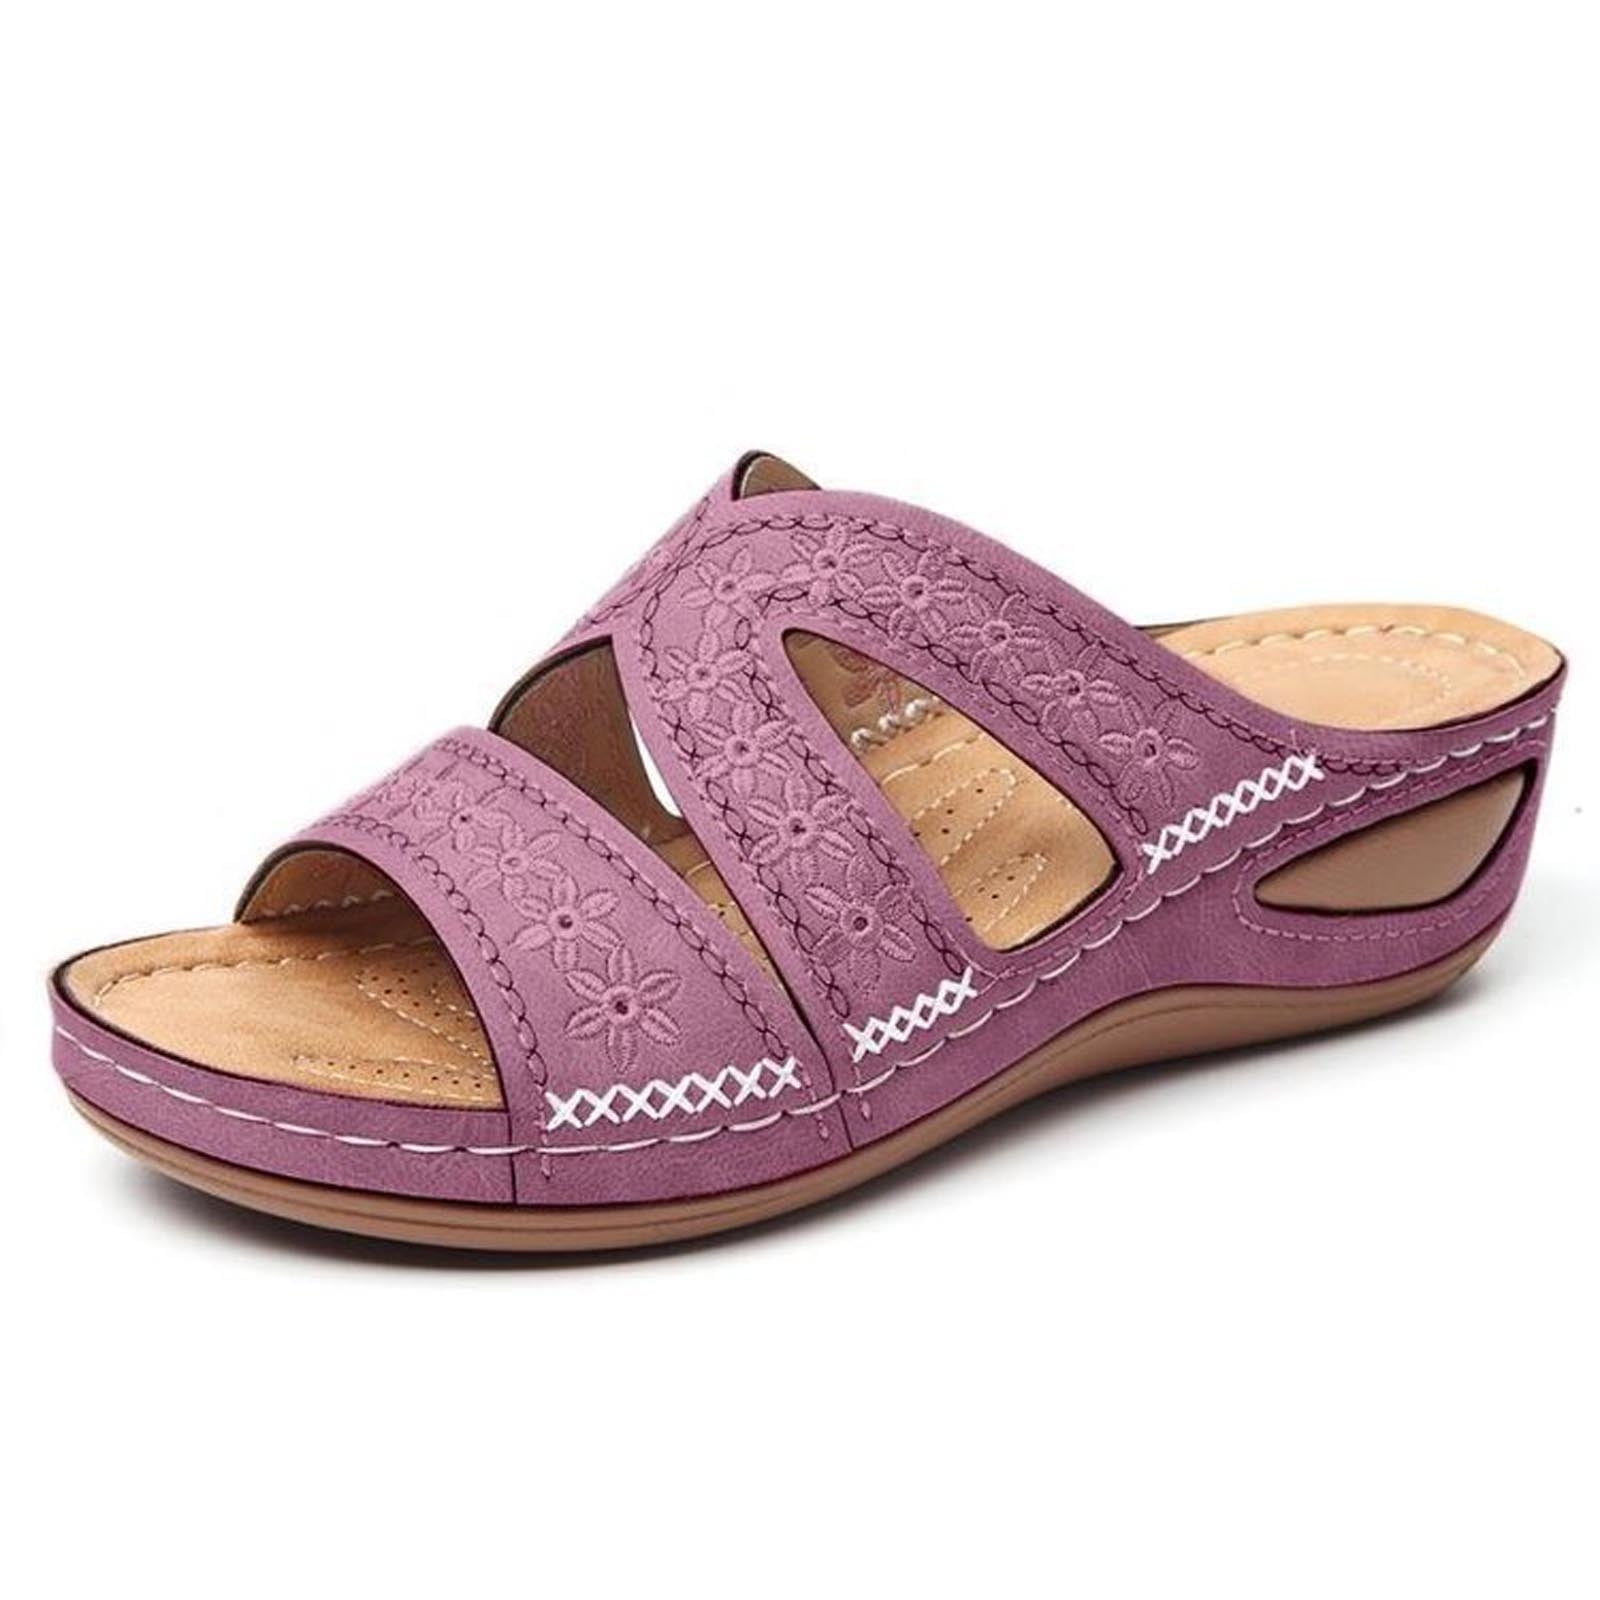 Pool sandals at affordable prices - Shop online